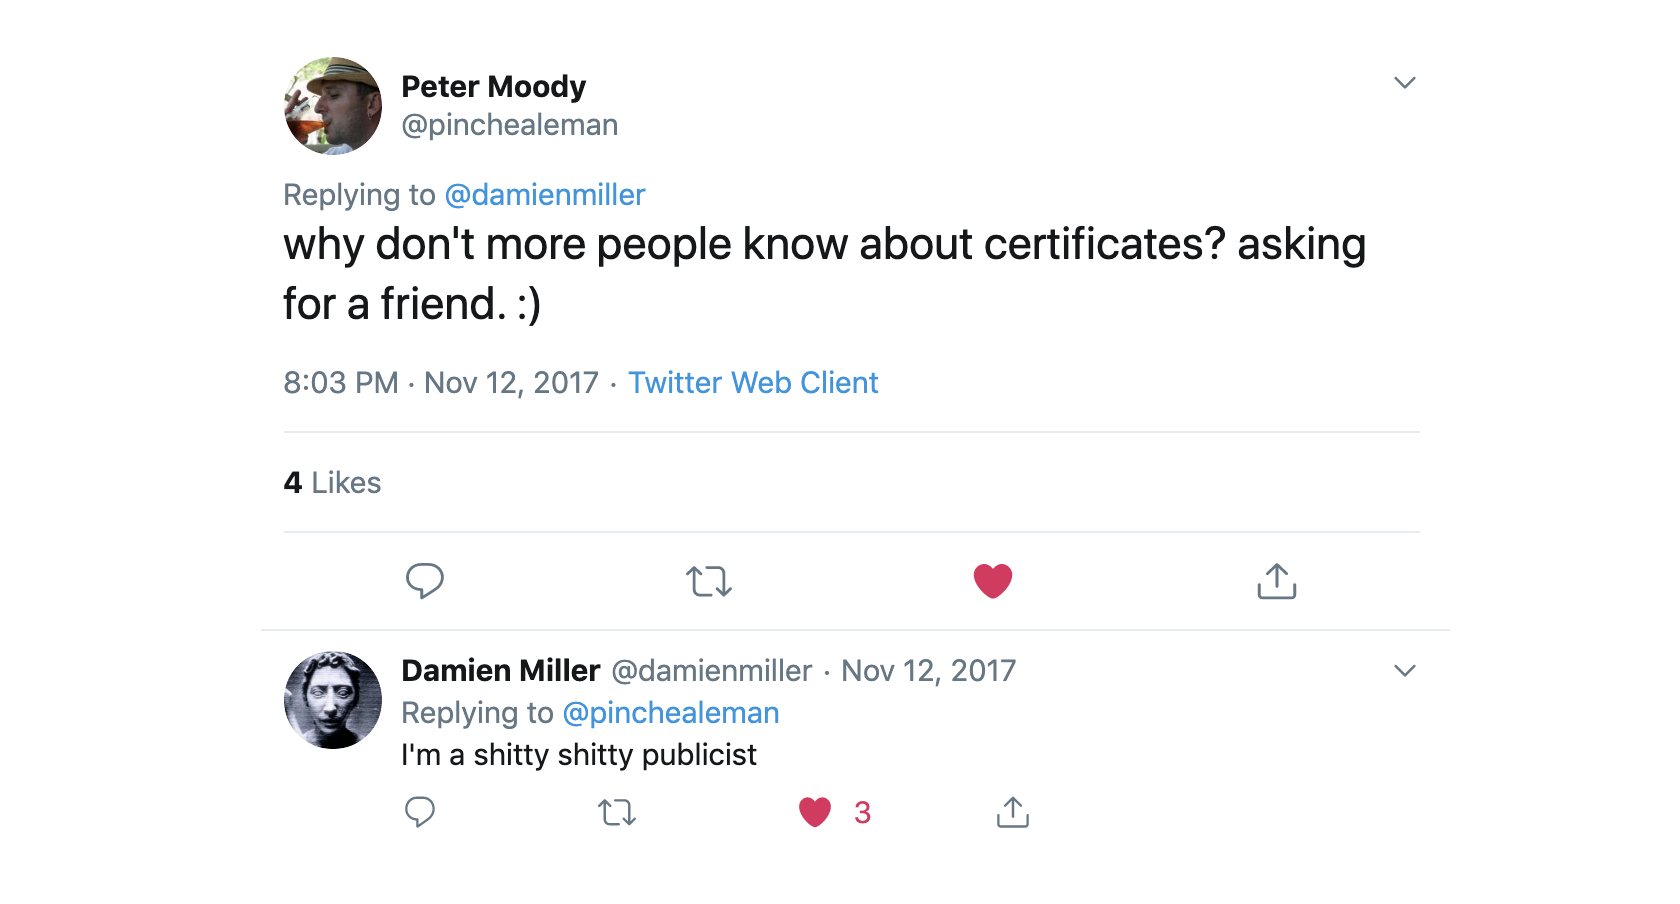 why don’t more people know about ssh certificates?